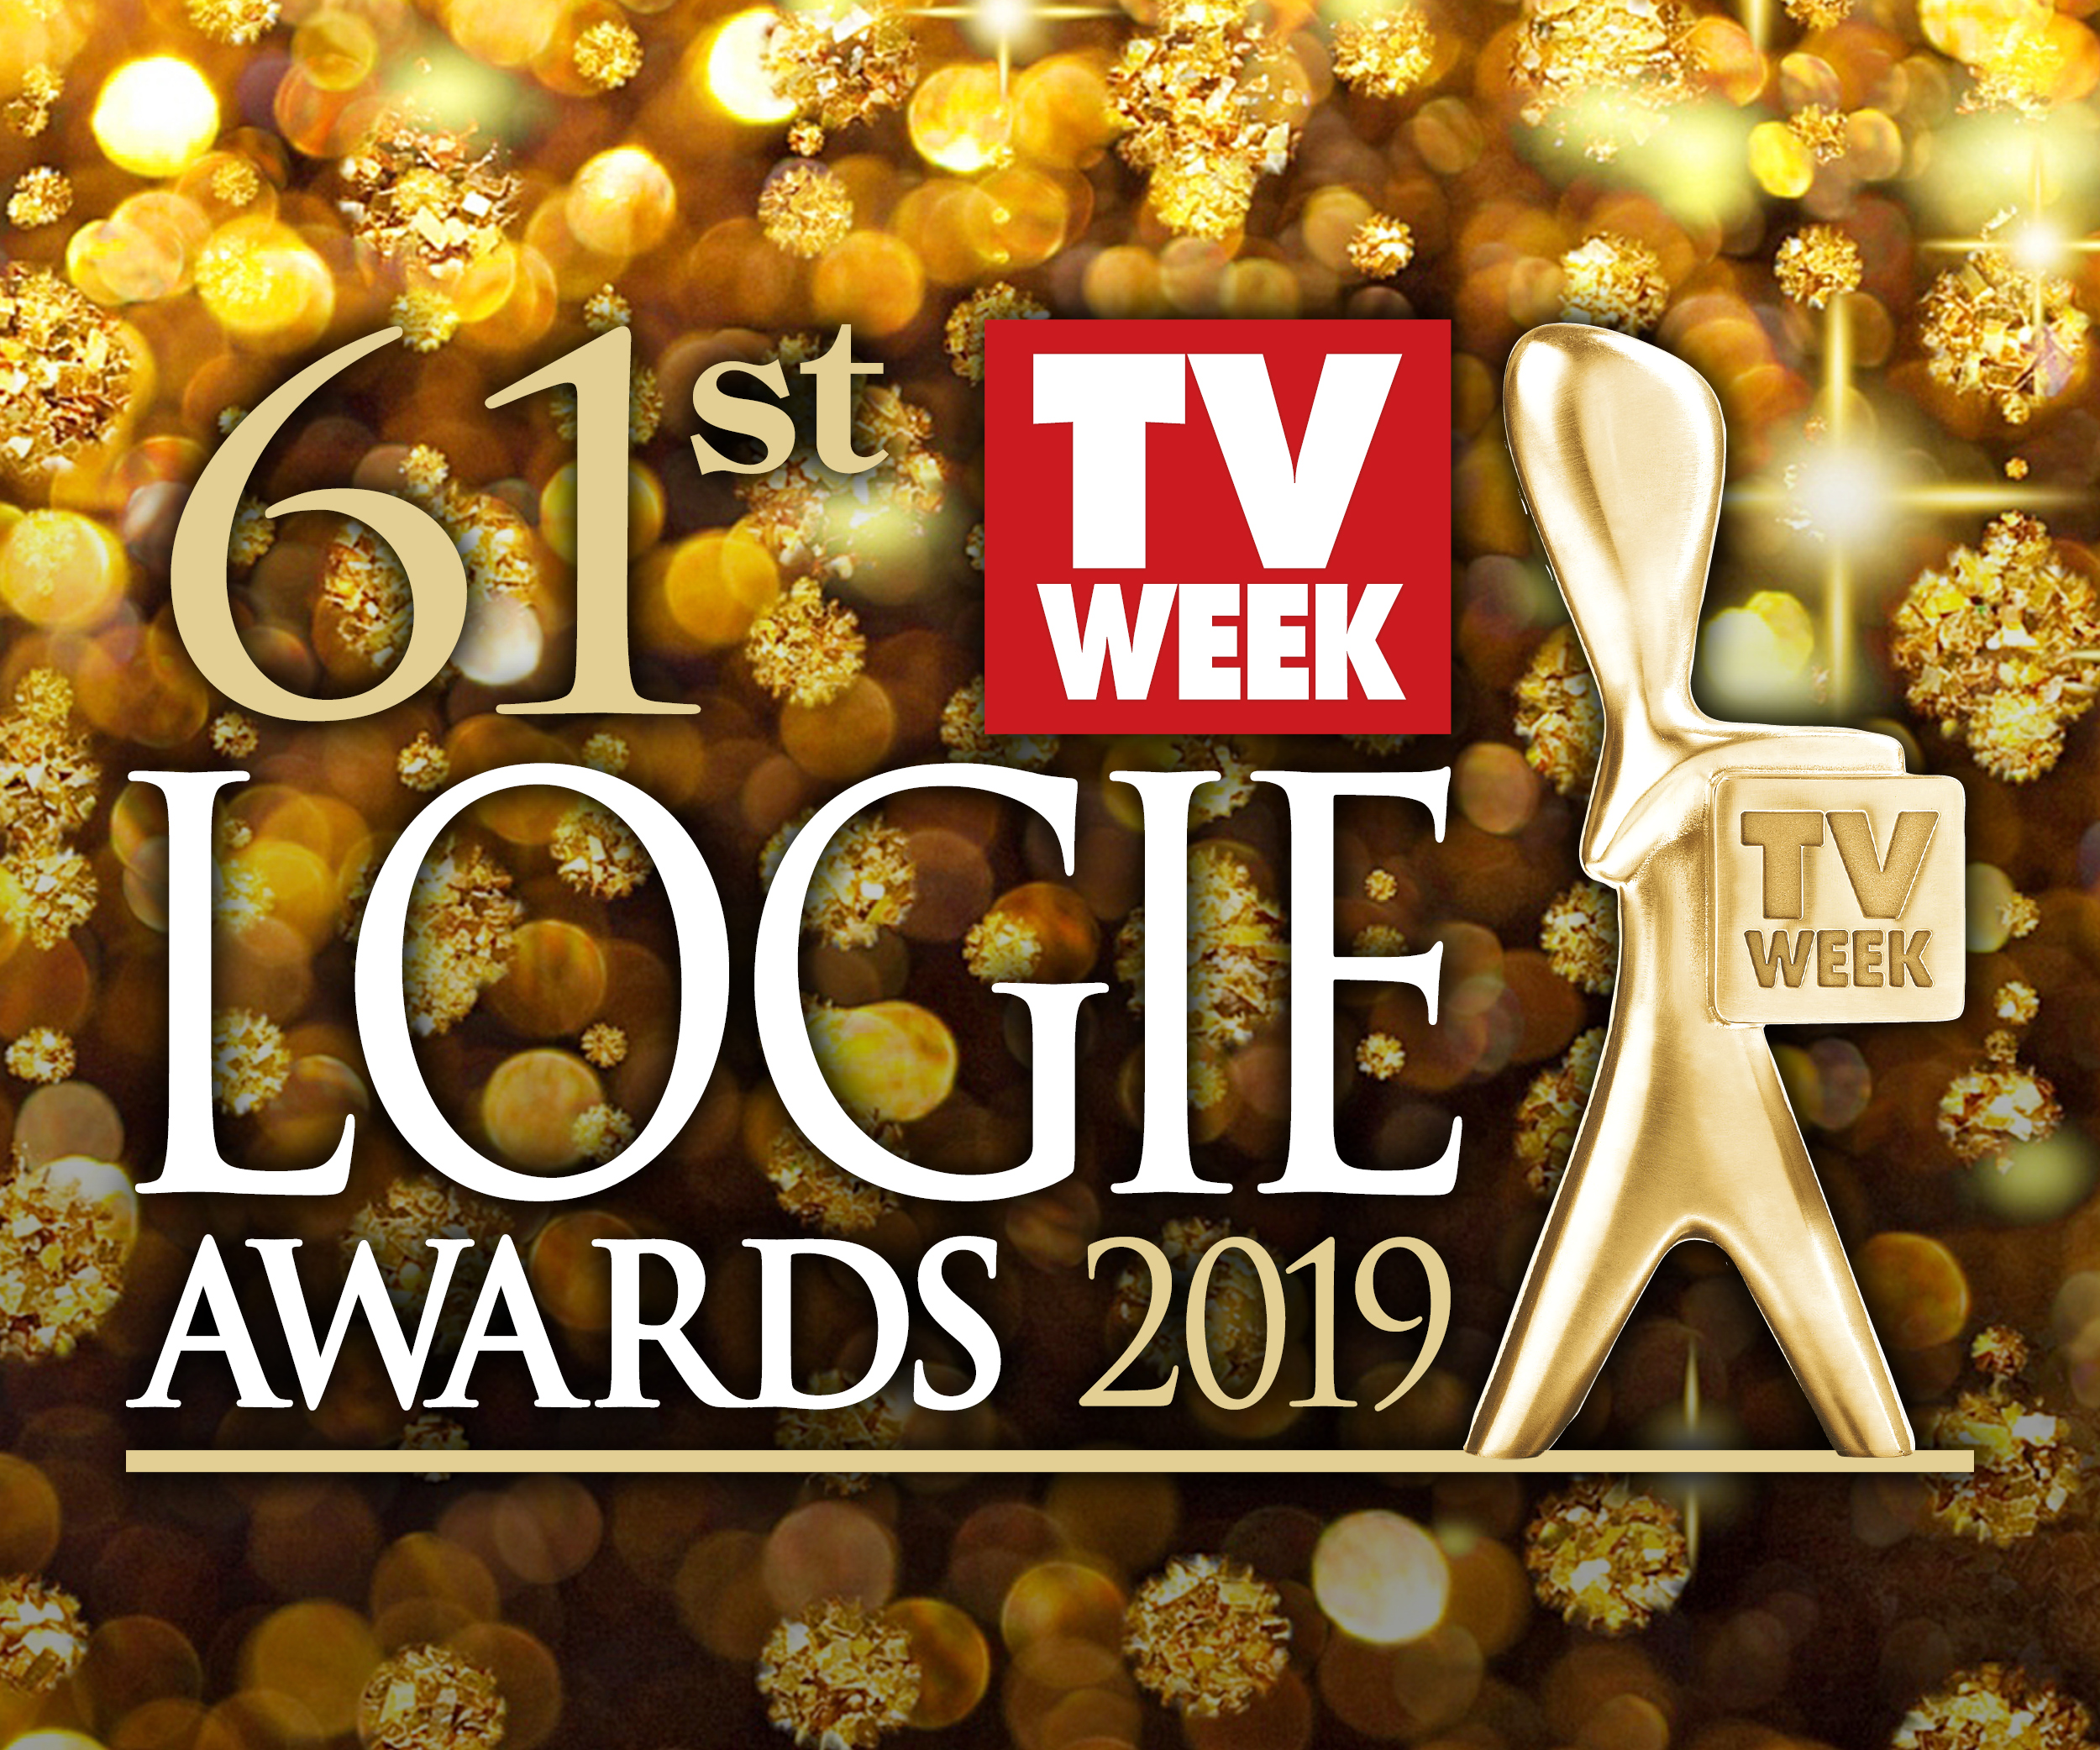 The full list of nominees and winners at the 2019 TV WEEK Logie Awards